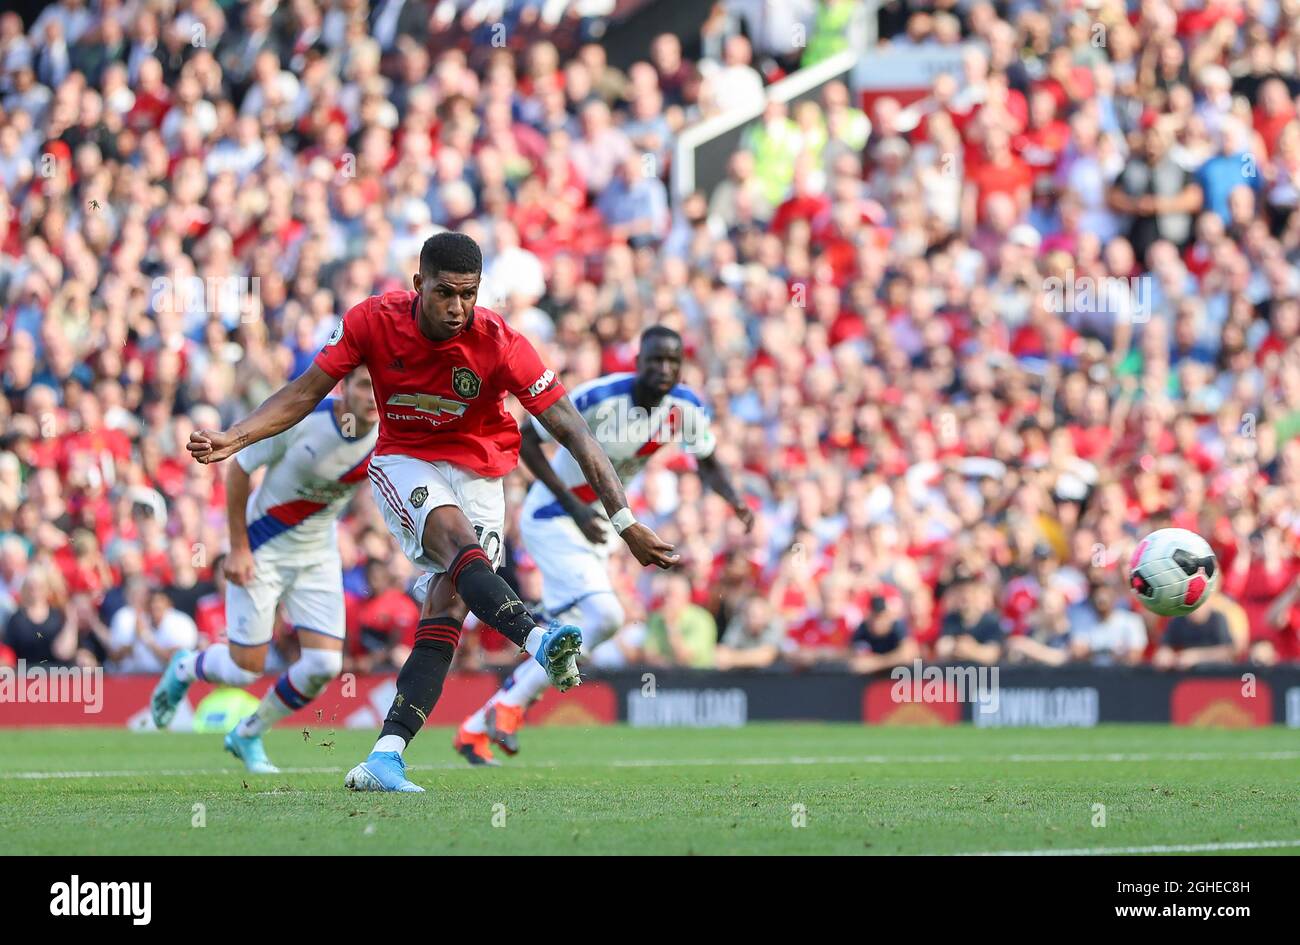 Marcus Rashford of Manchester United misses a penalty kick during the Premier League match at Old Trafford, Manchester. Picture date: 24th August 2019. Picture credit should read: James Wilson/Sportimage via PA Images Stock Photo